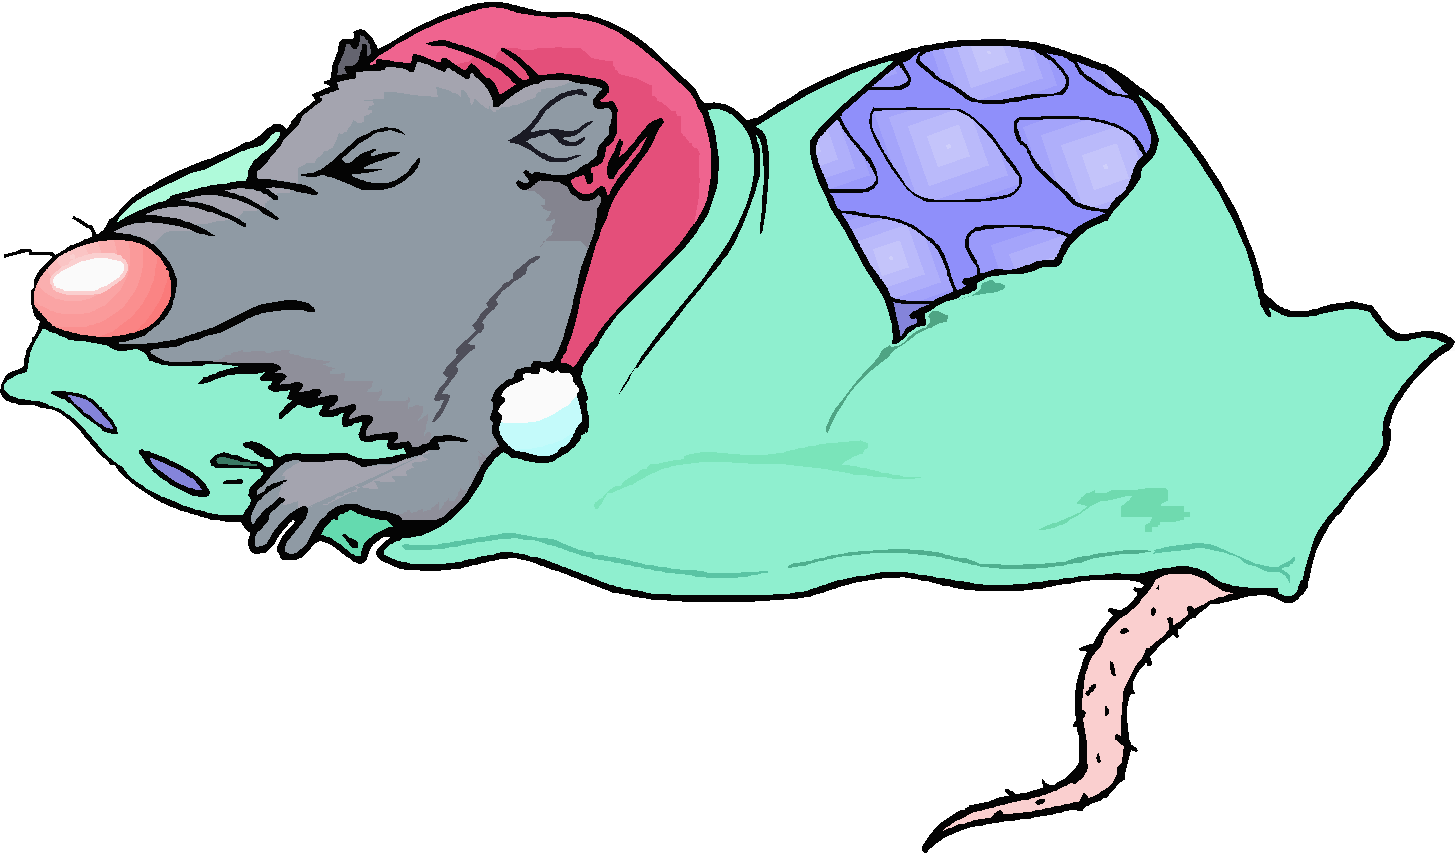 Coloured cartoon of grey rat, wearing a red nightcap and sleeping on his stomach in a green sleeping-bag